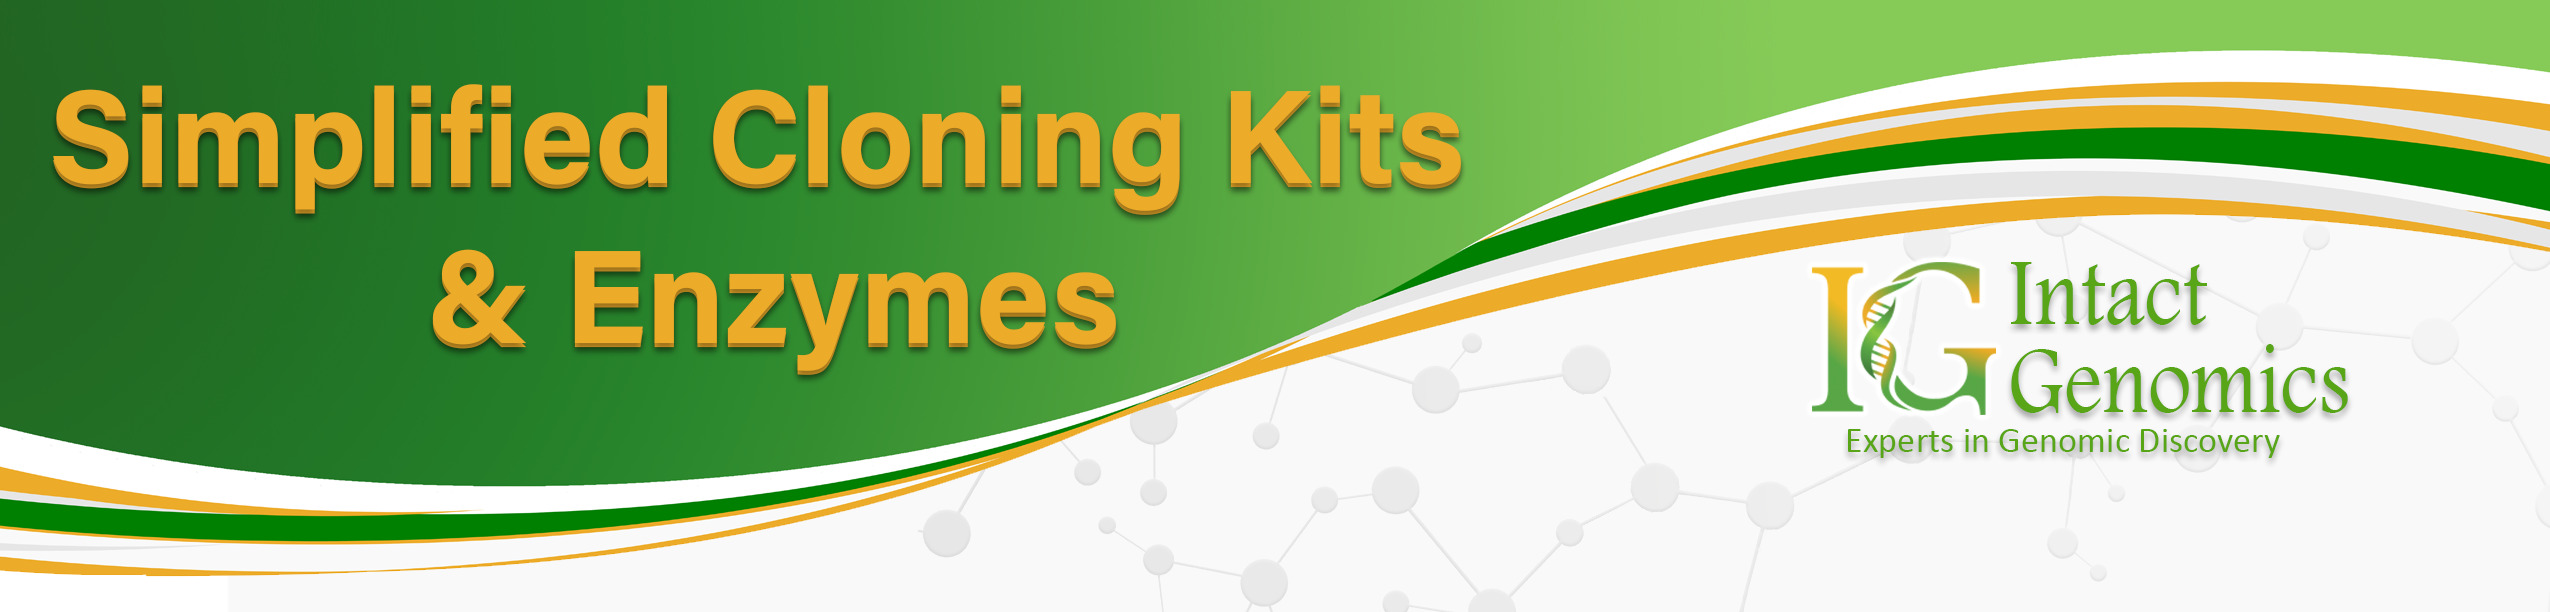 Simplified Cloning Kits and Enzymes